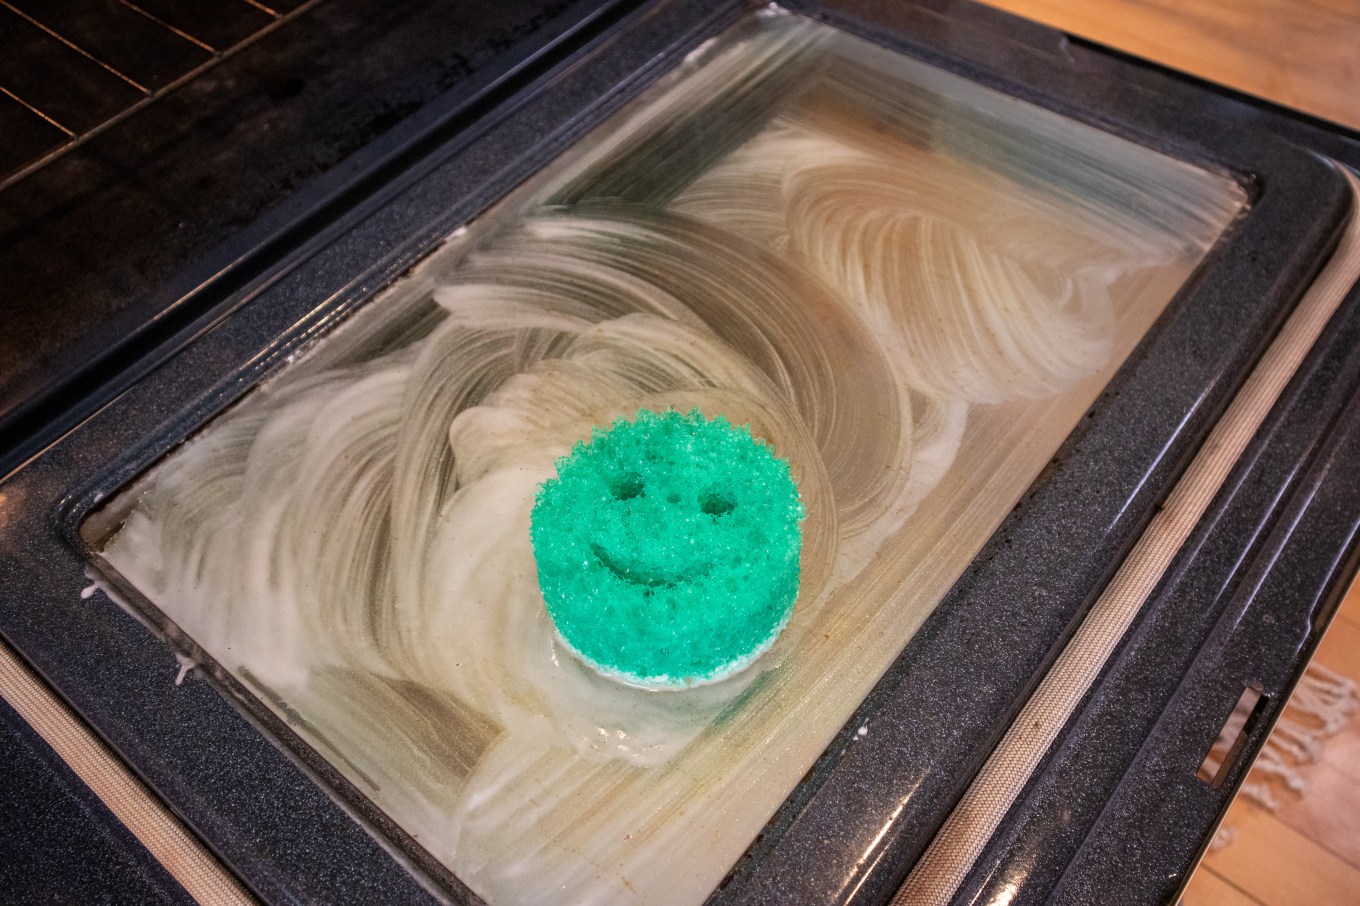 Baking soda mixed with water being spread over the top of an oven with a sponge.